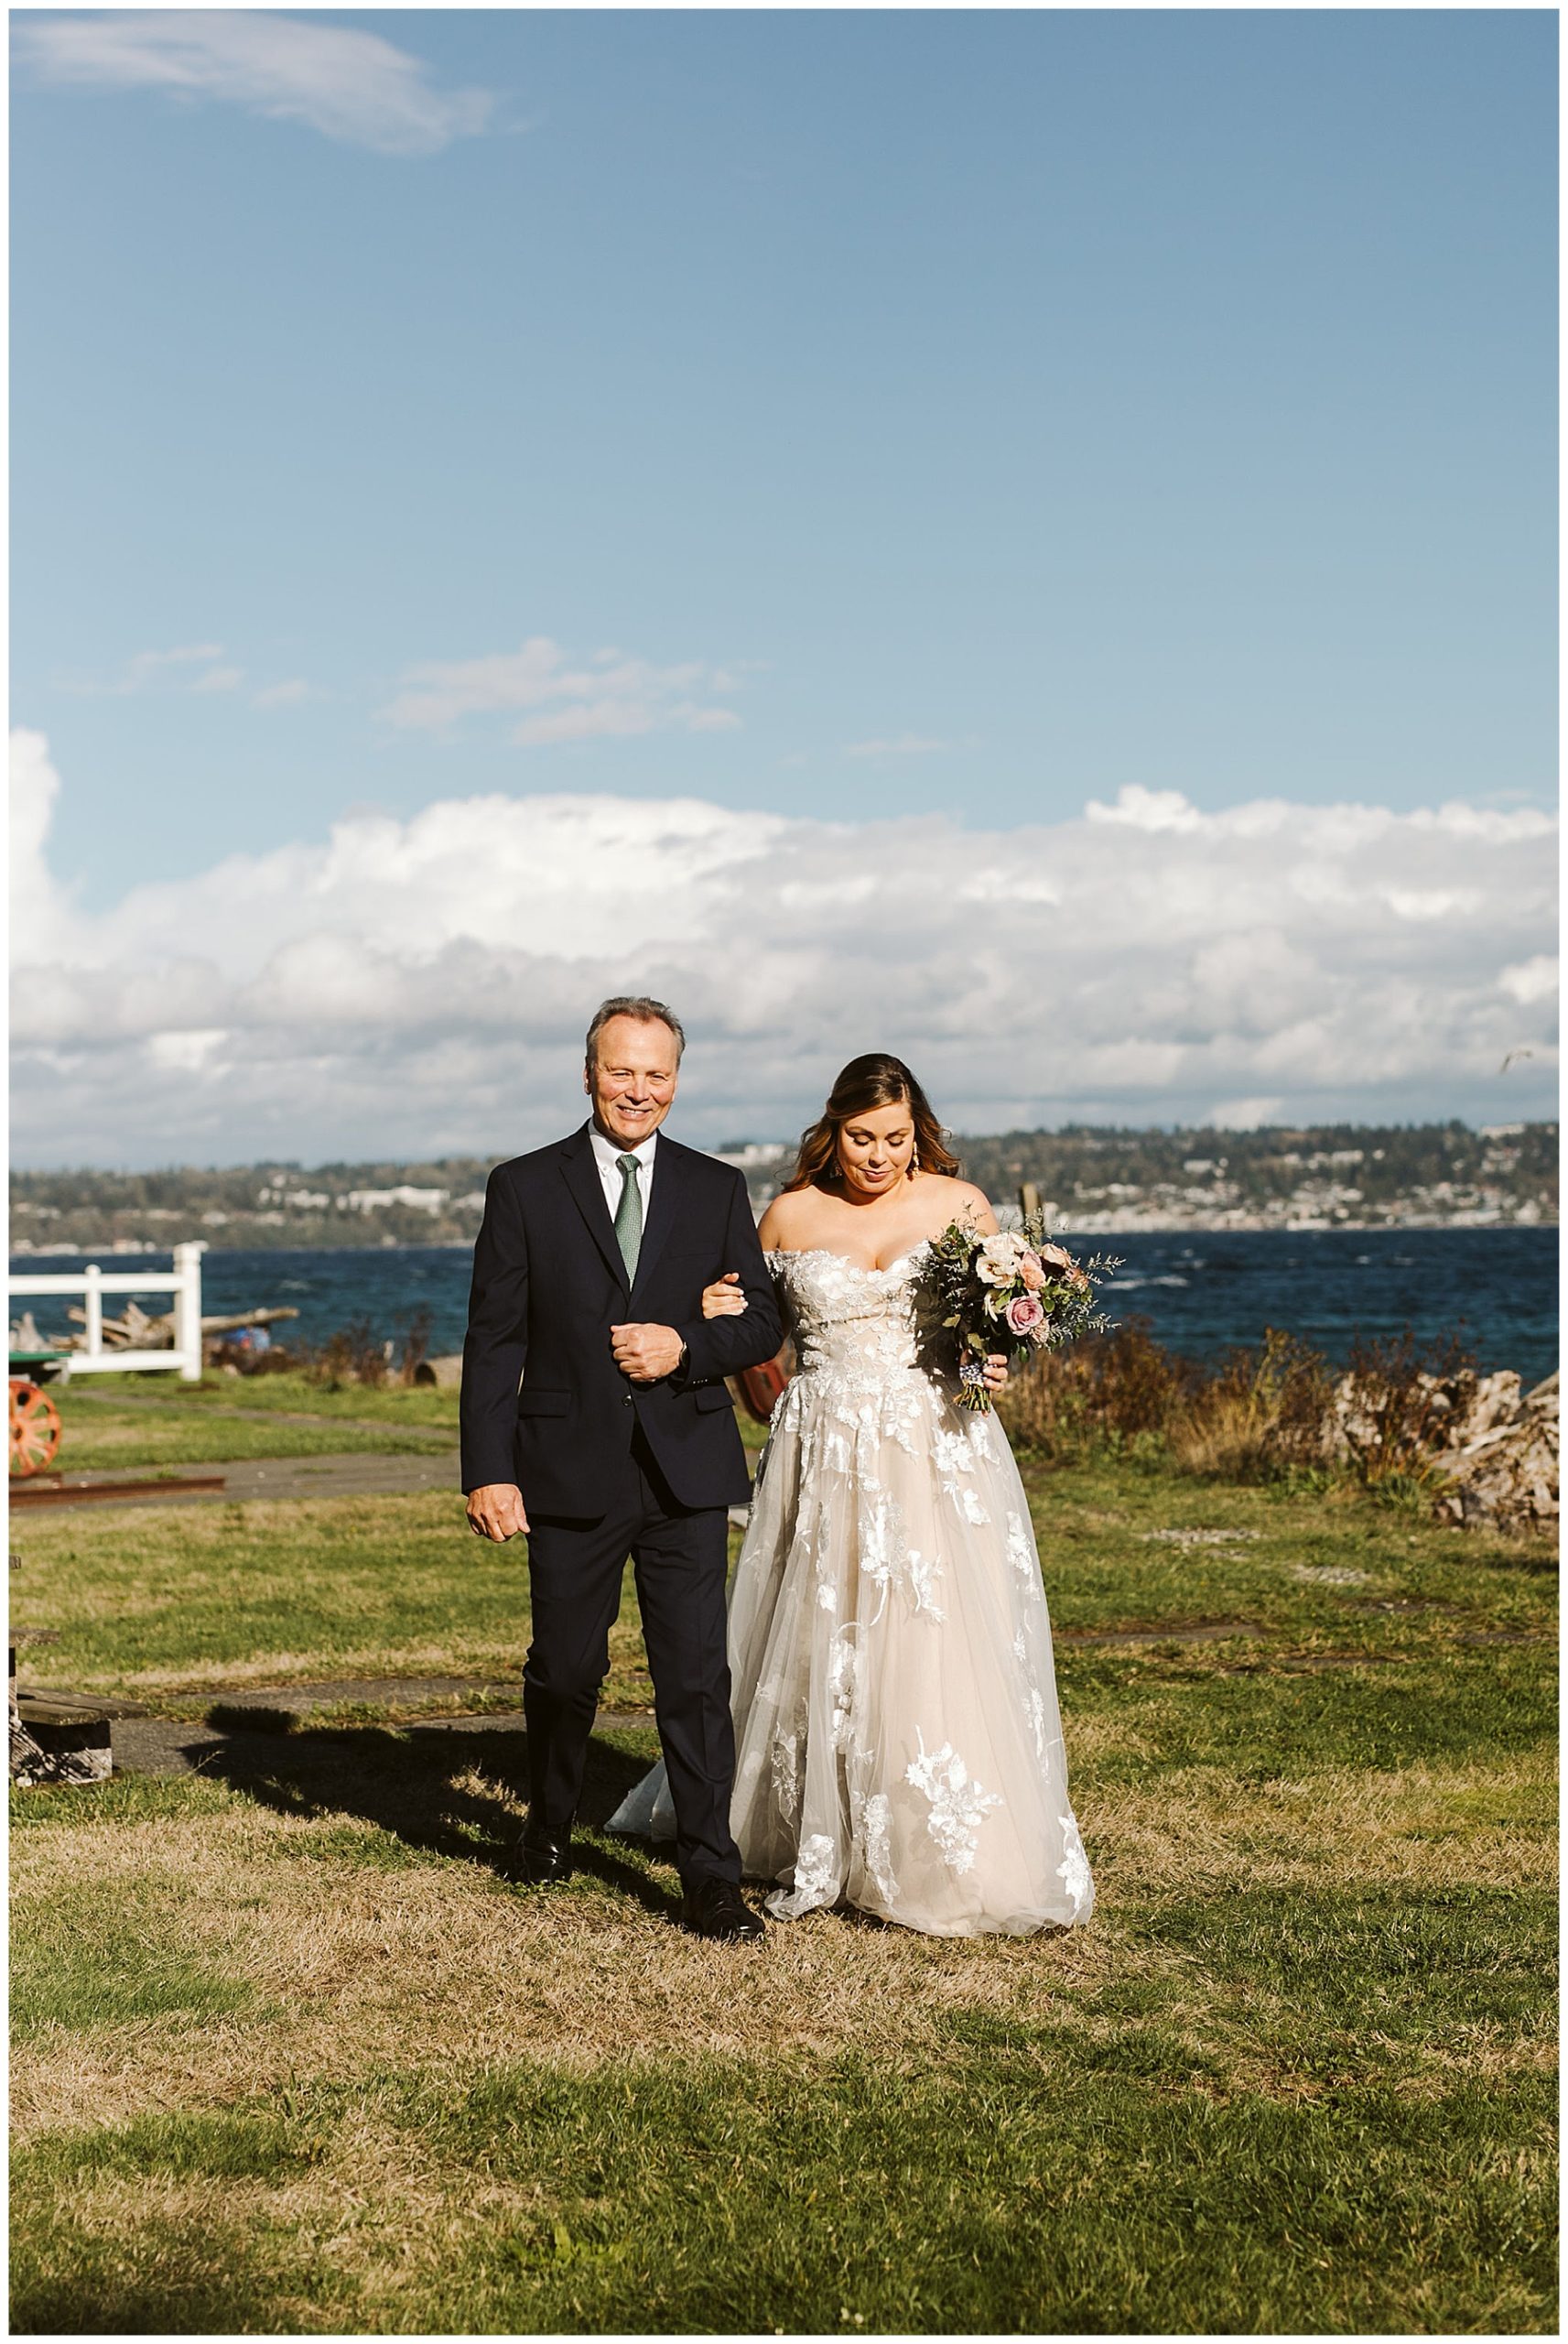 father of the bride walking bride down the isle at her elopement on Vashon Island in Washington